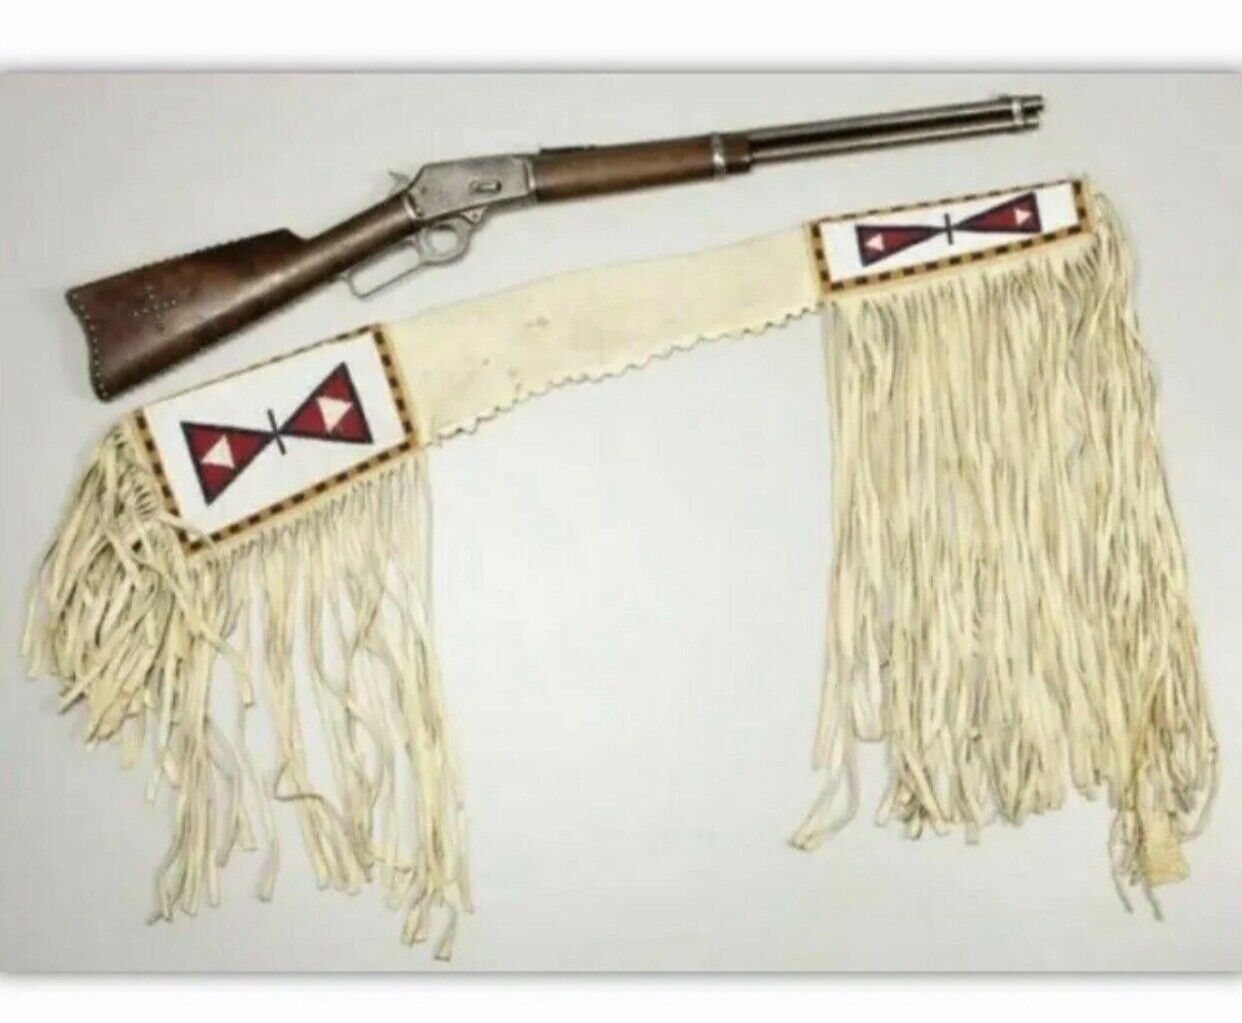 Handmade Beaded Rifle Scabbard Sioux Style Suede Leather Old American RF1